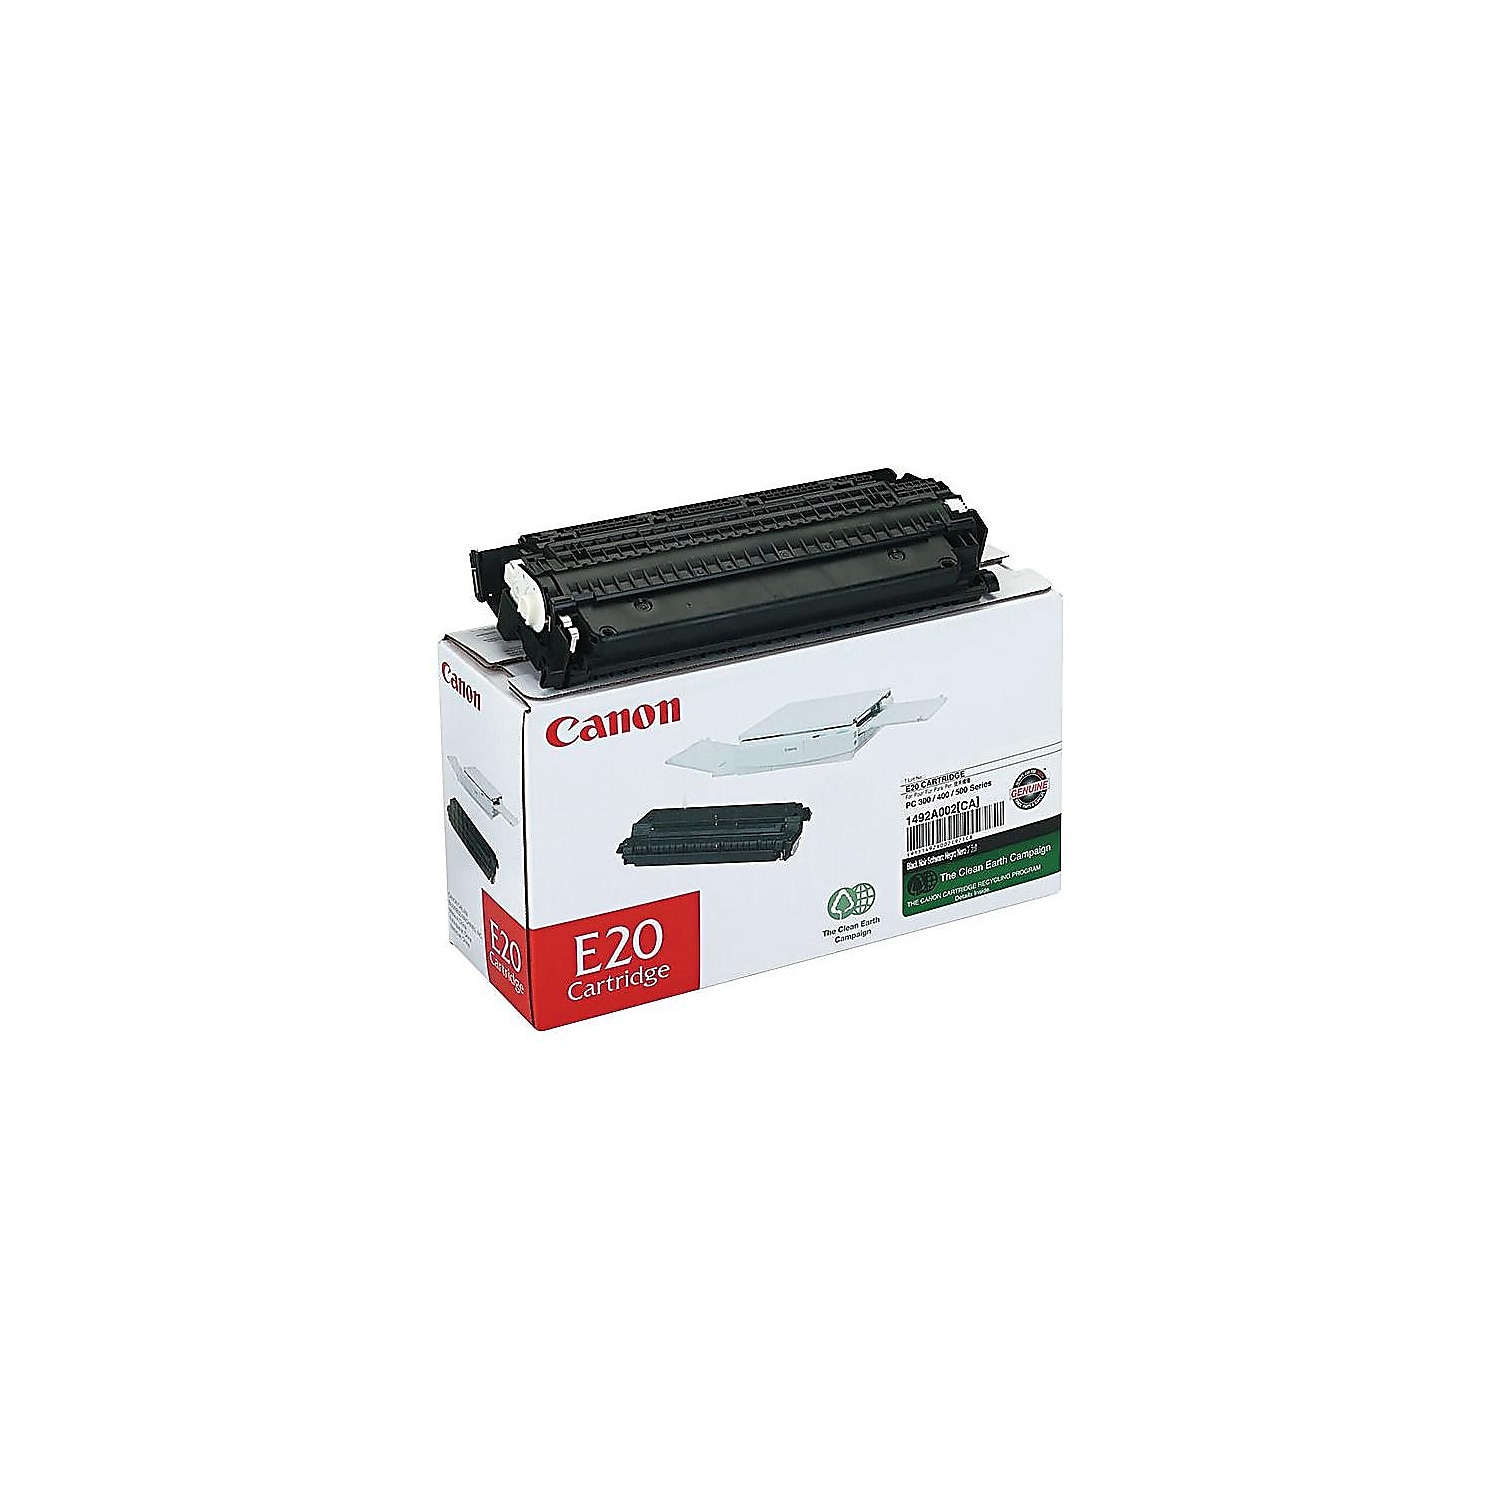 Canon 1492A002 2000 Page-Yield 1492A002 Toner - Black - image 3 of 3